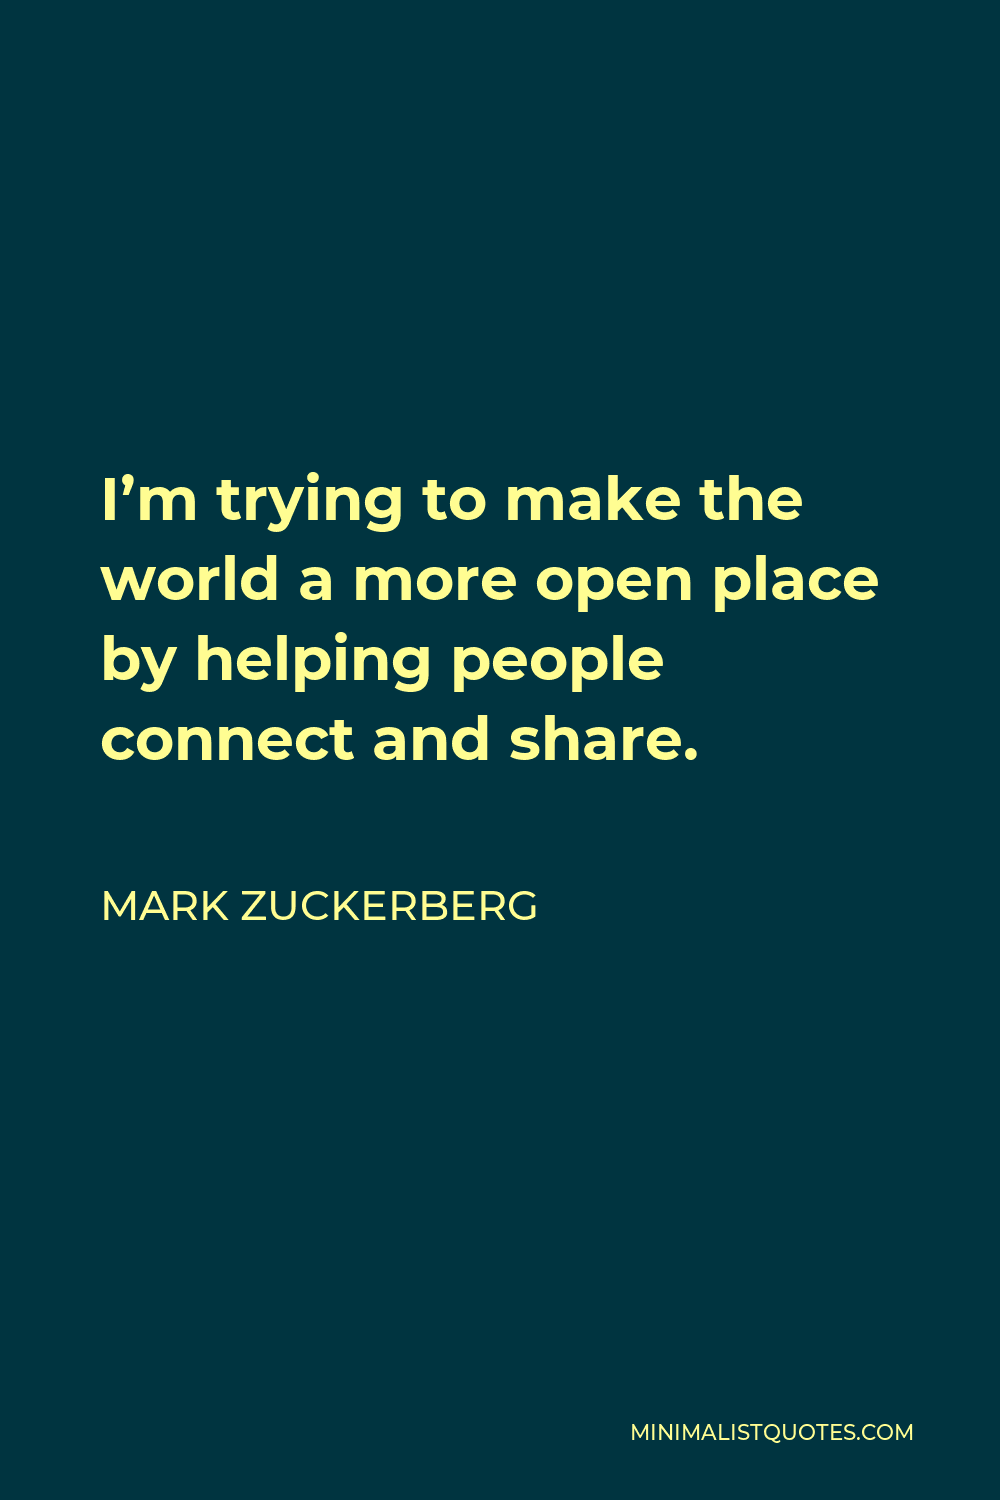 Mark Zuckerberg Quote - I’m trying to make the world a more open place by helping people connect and share.